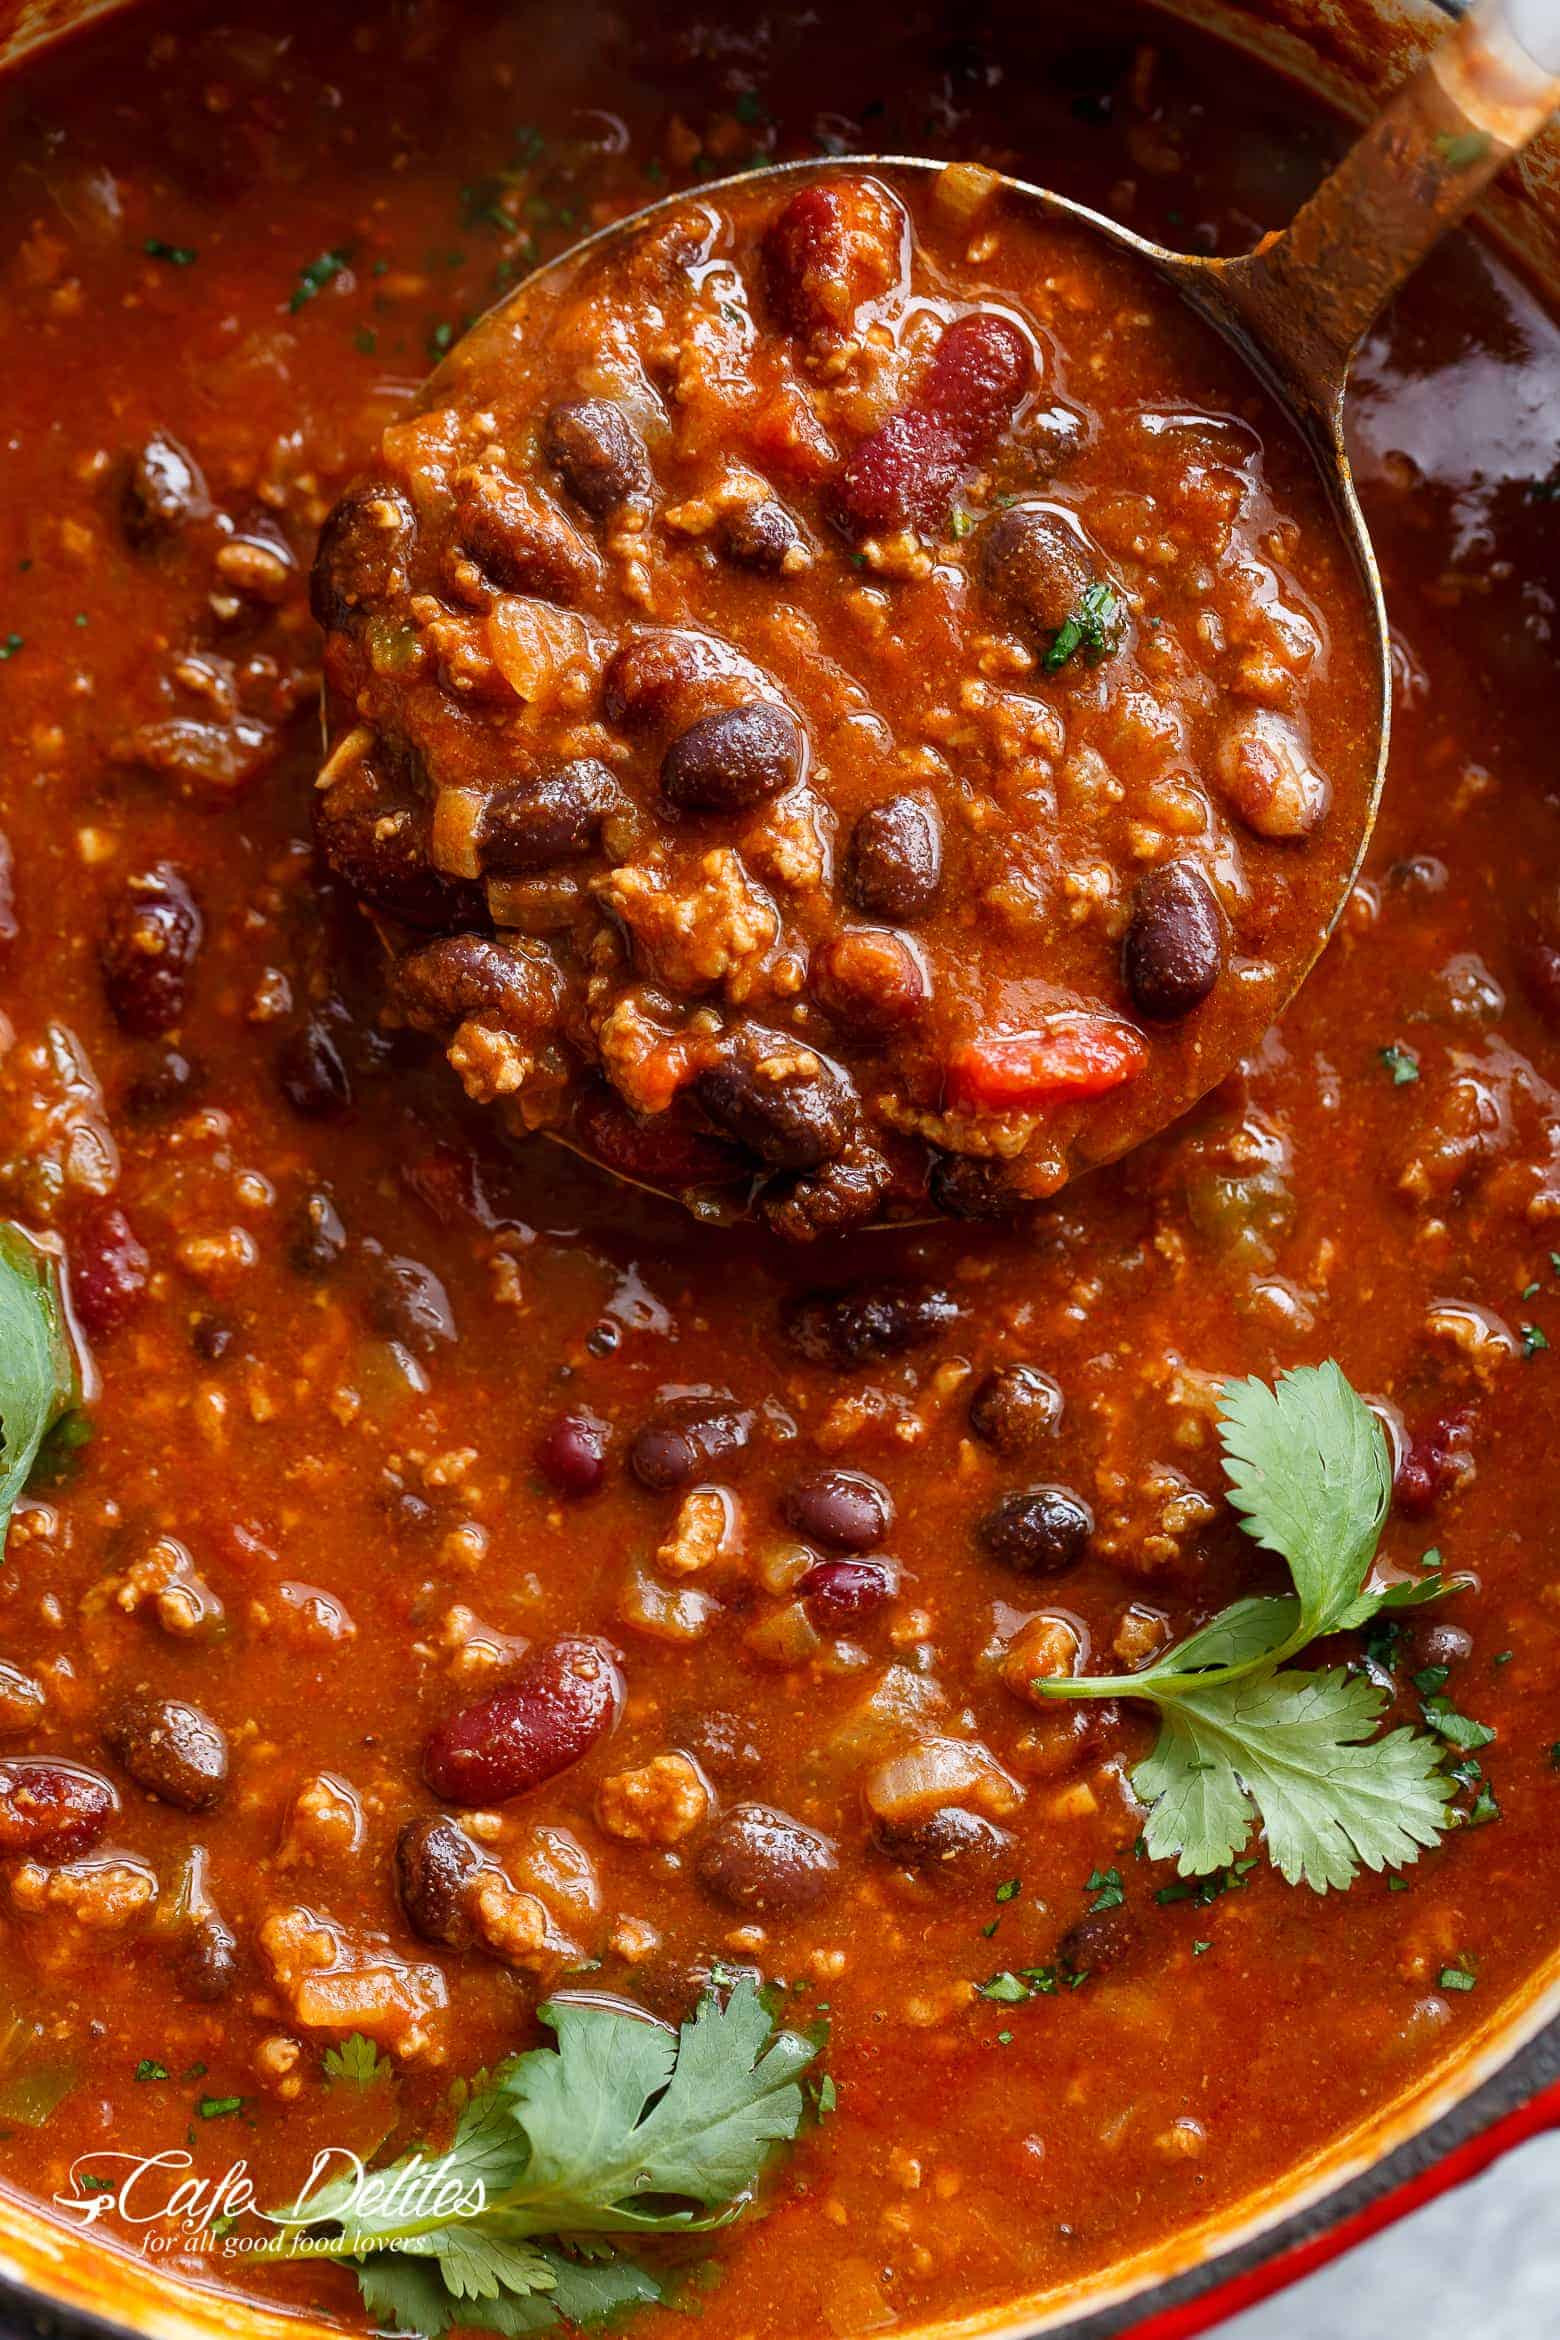 Chili Recipes With Beef
 Beef Chili Recipe Cafe Delites